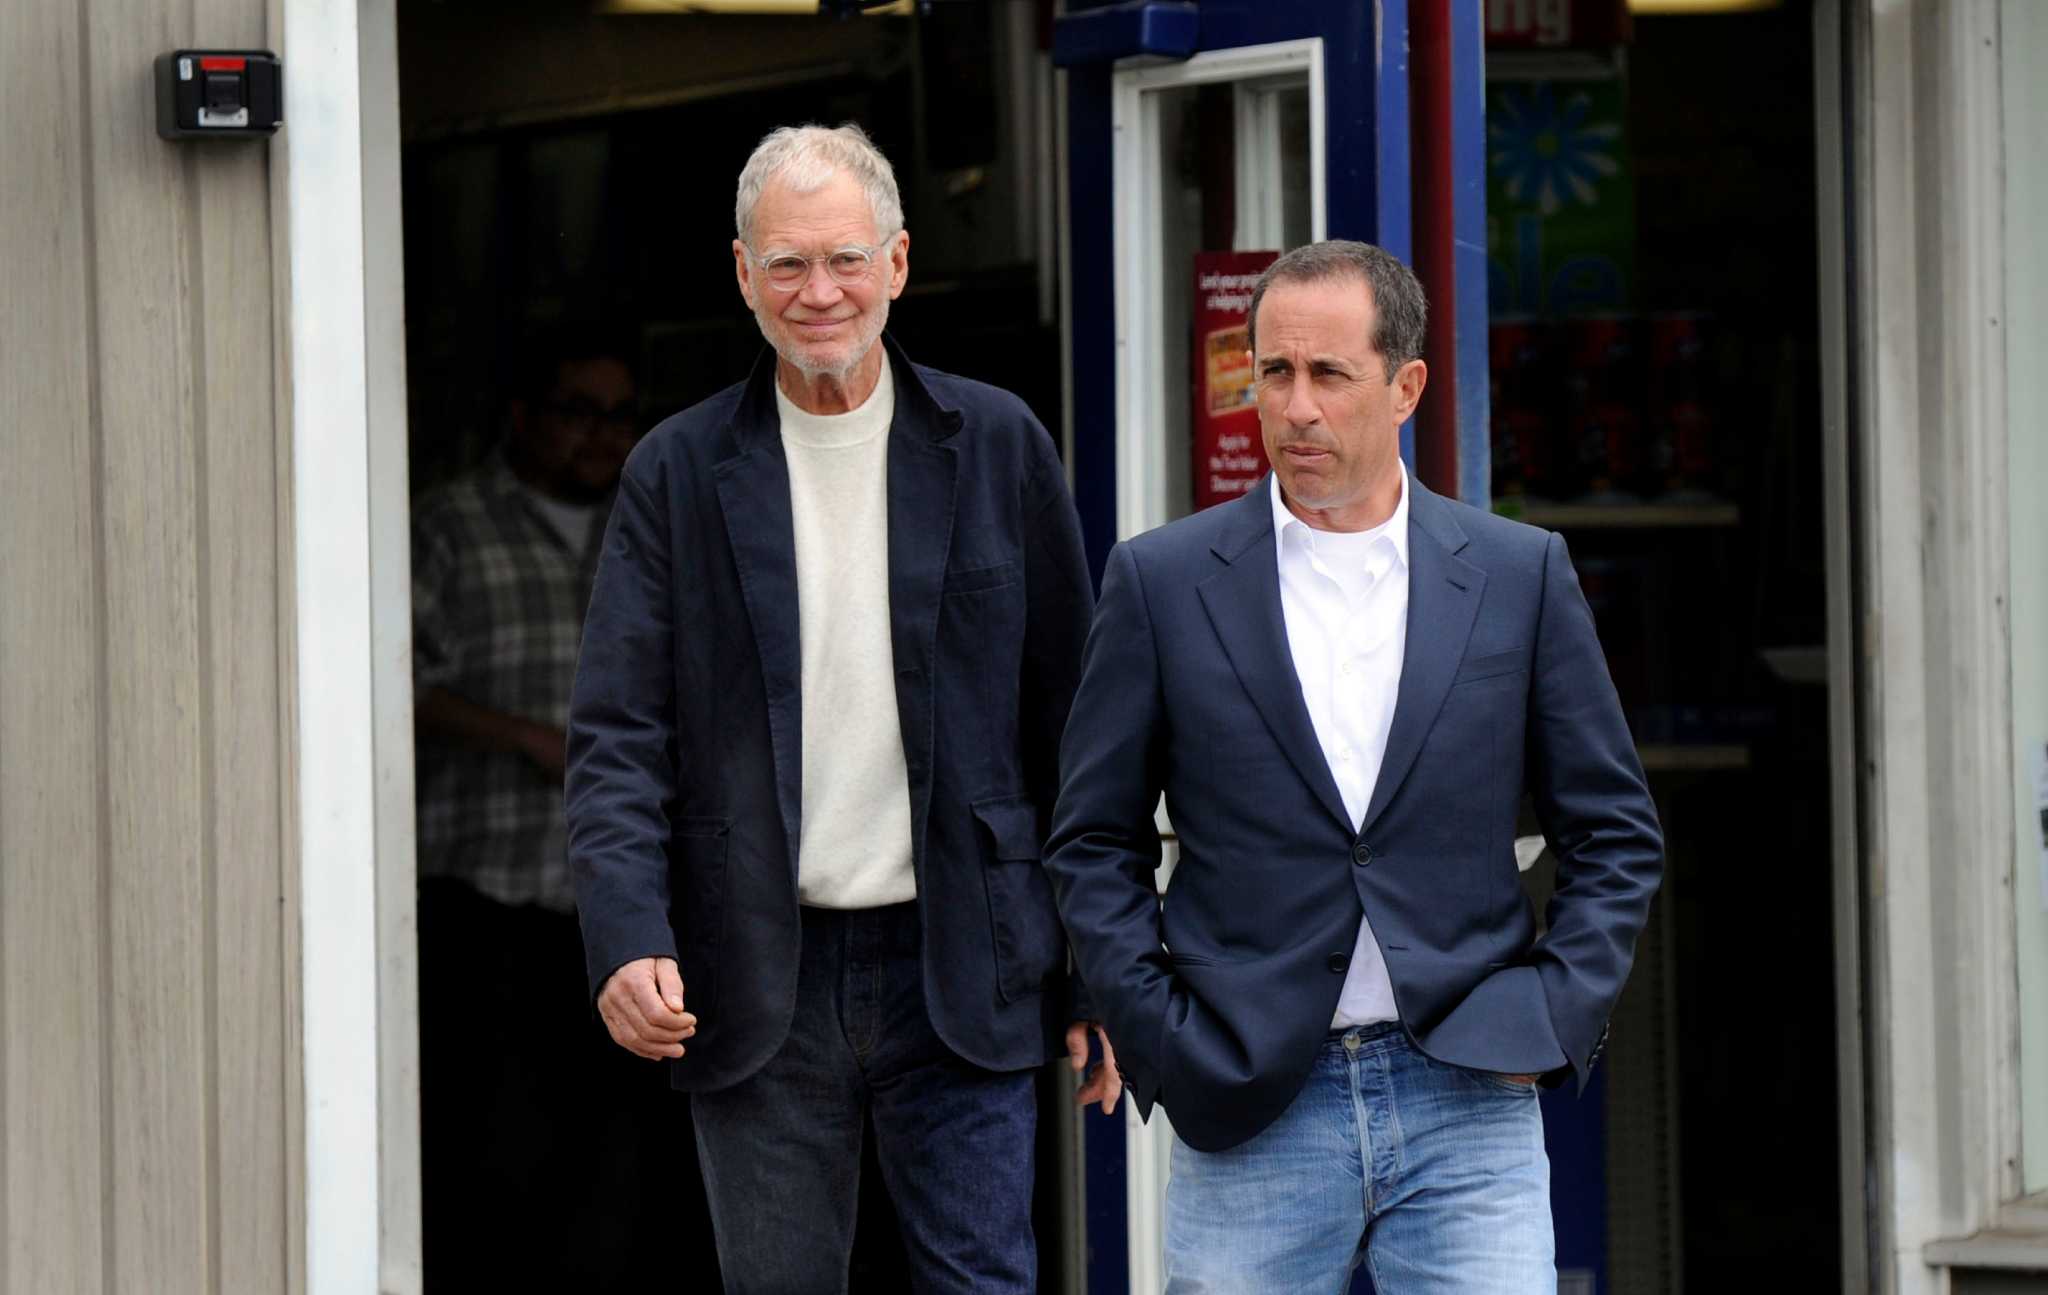 Jerry Seinfeld Interviews David Letterman on 'The Late Show' and